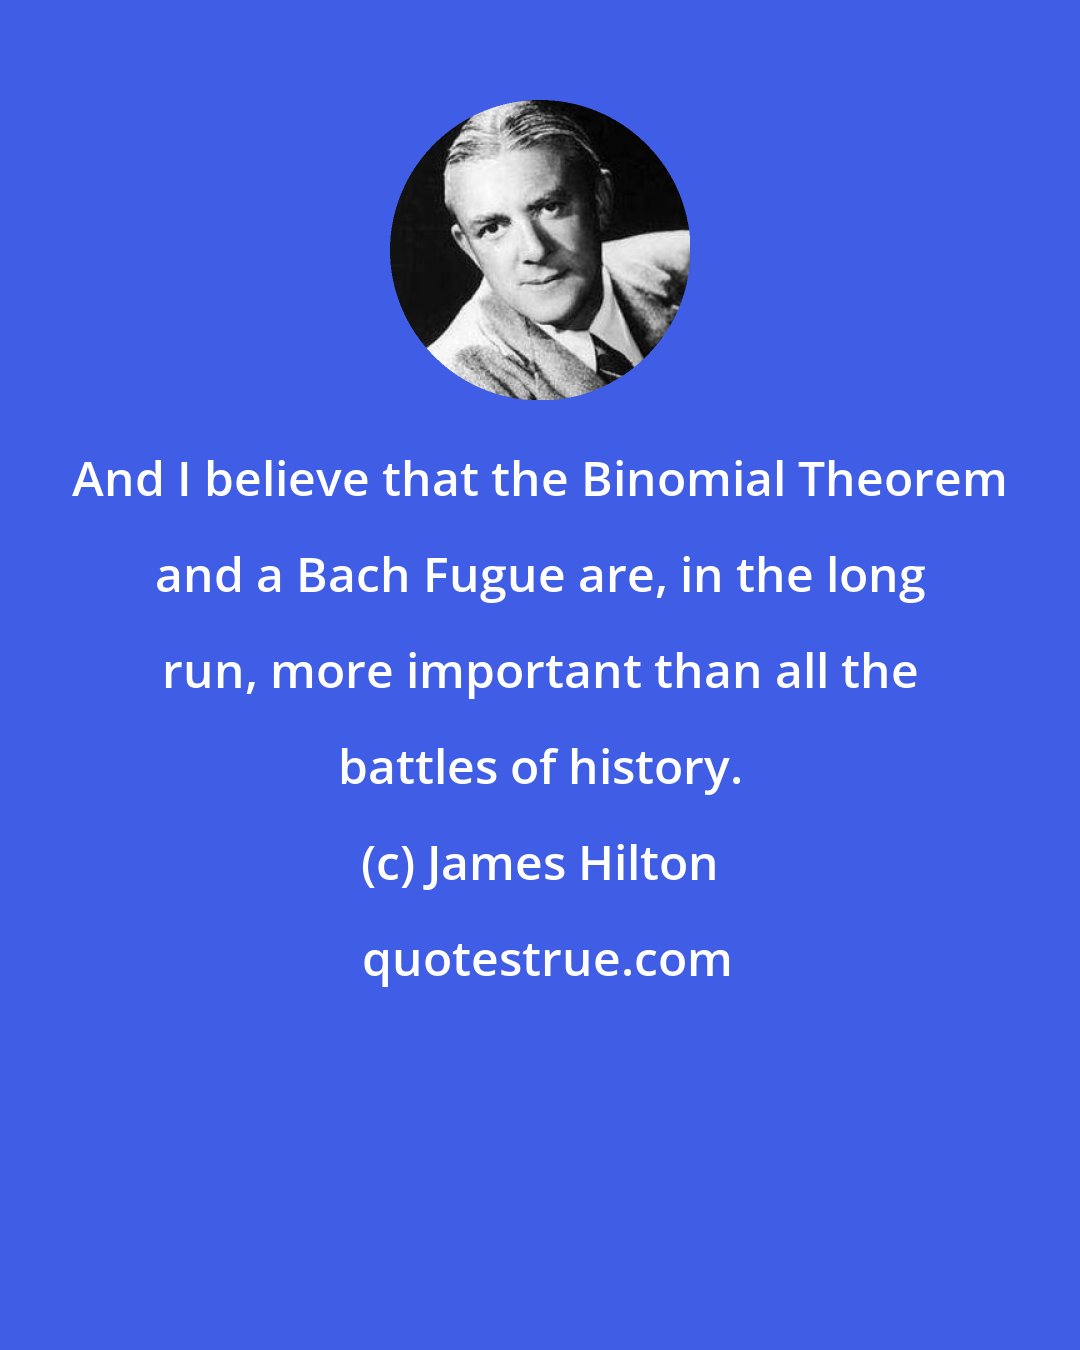 James Hilton: And I believe that the Binomial Theorem and a Bach Fugue are, in the long run, more important than all the battles of history.